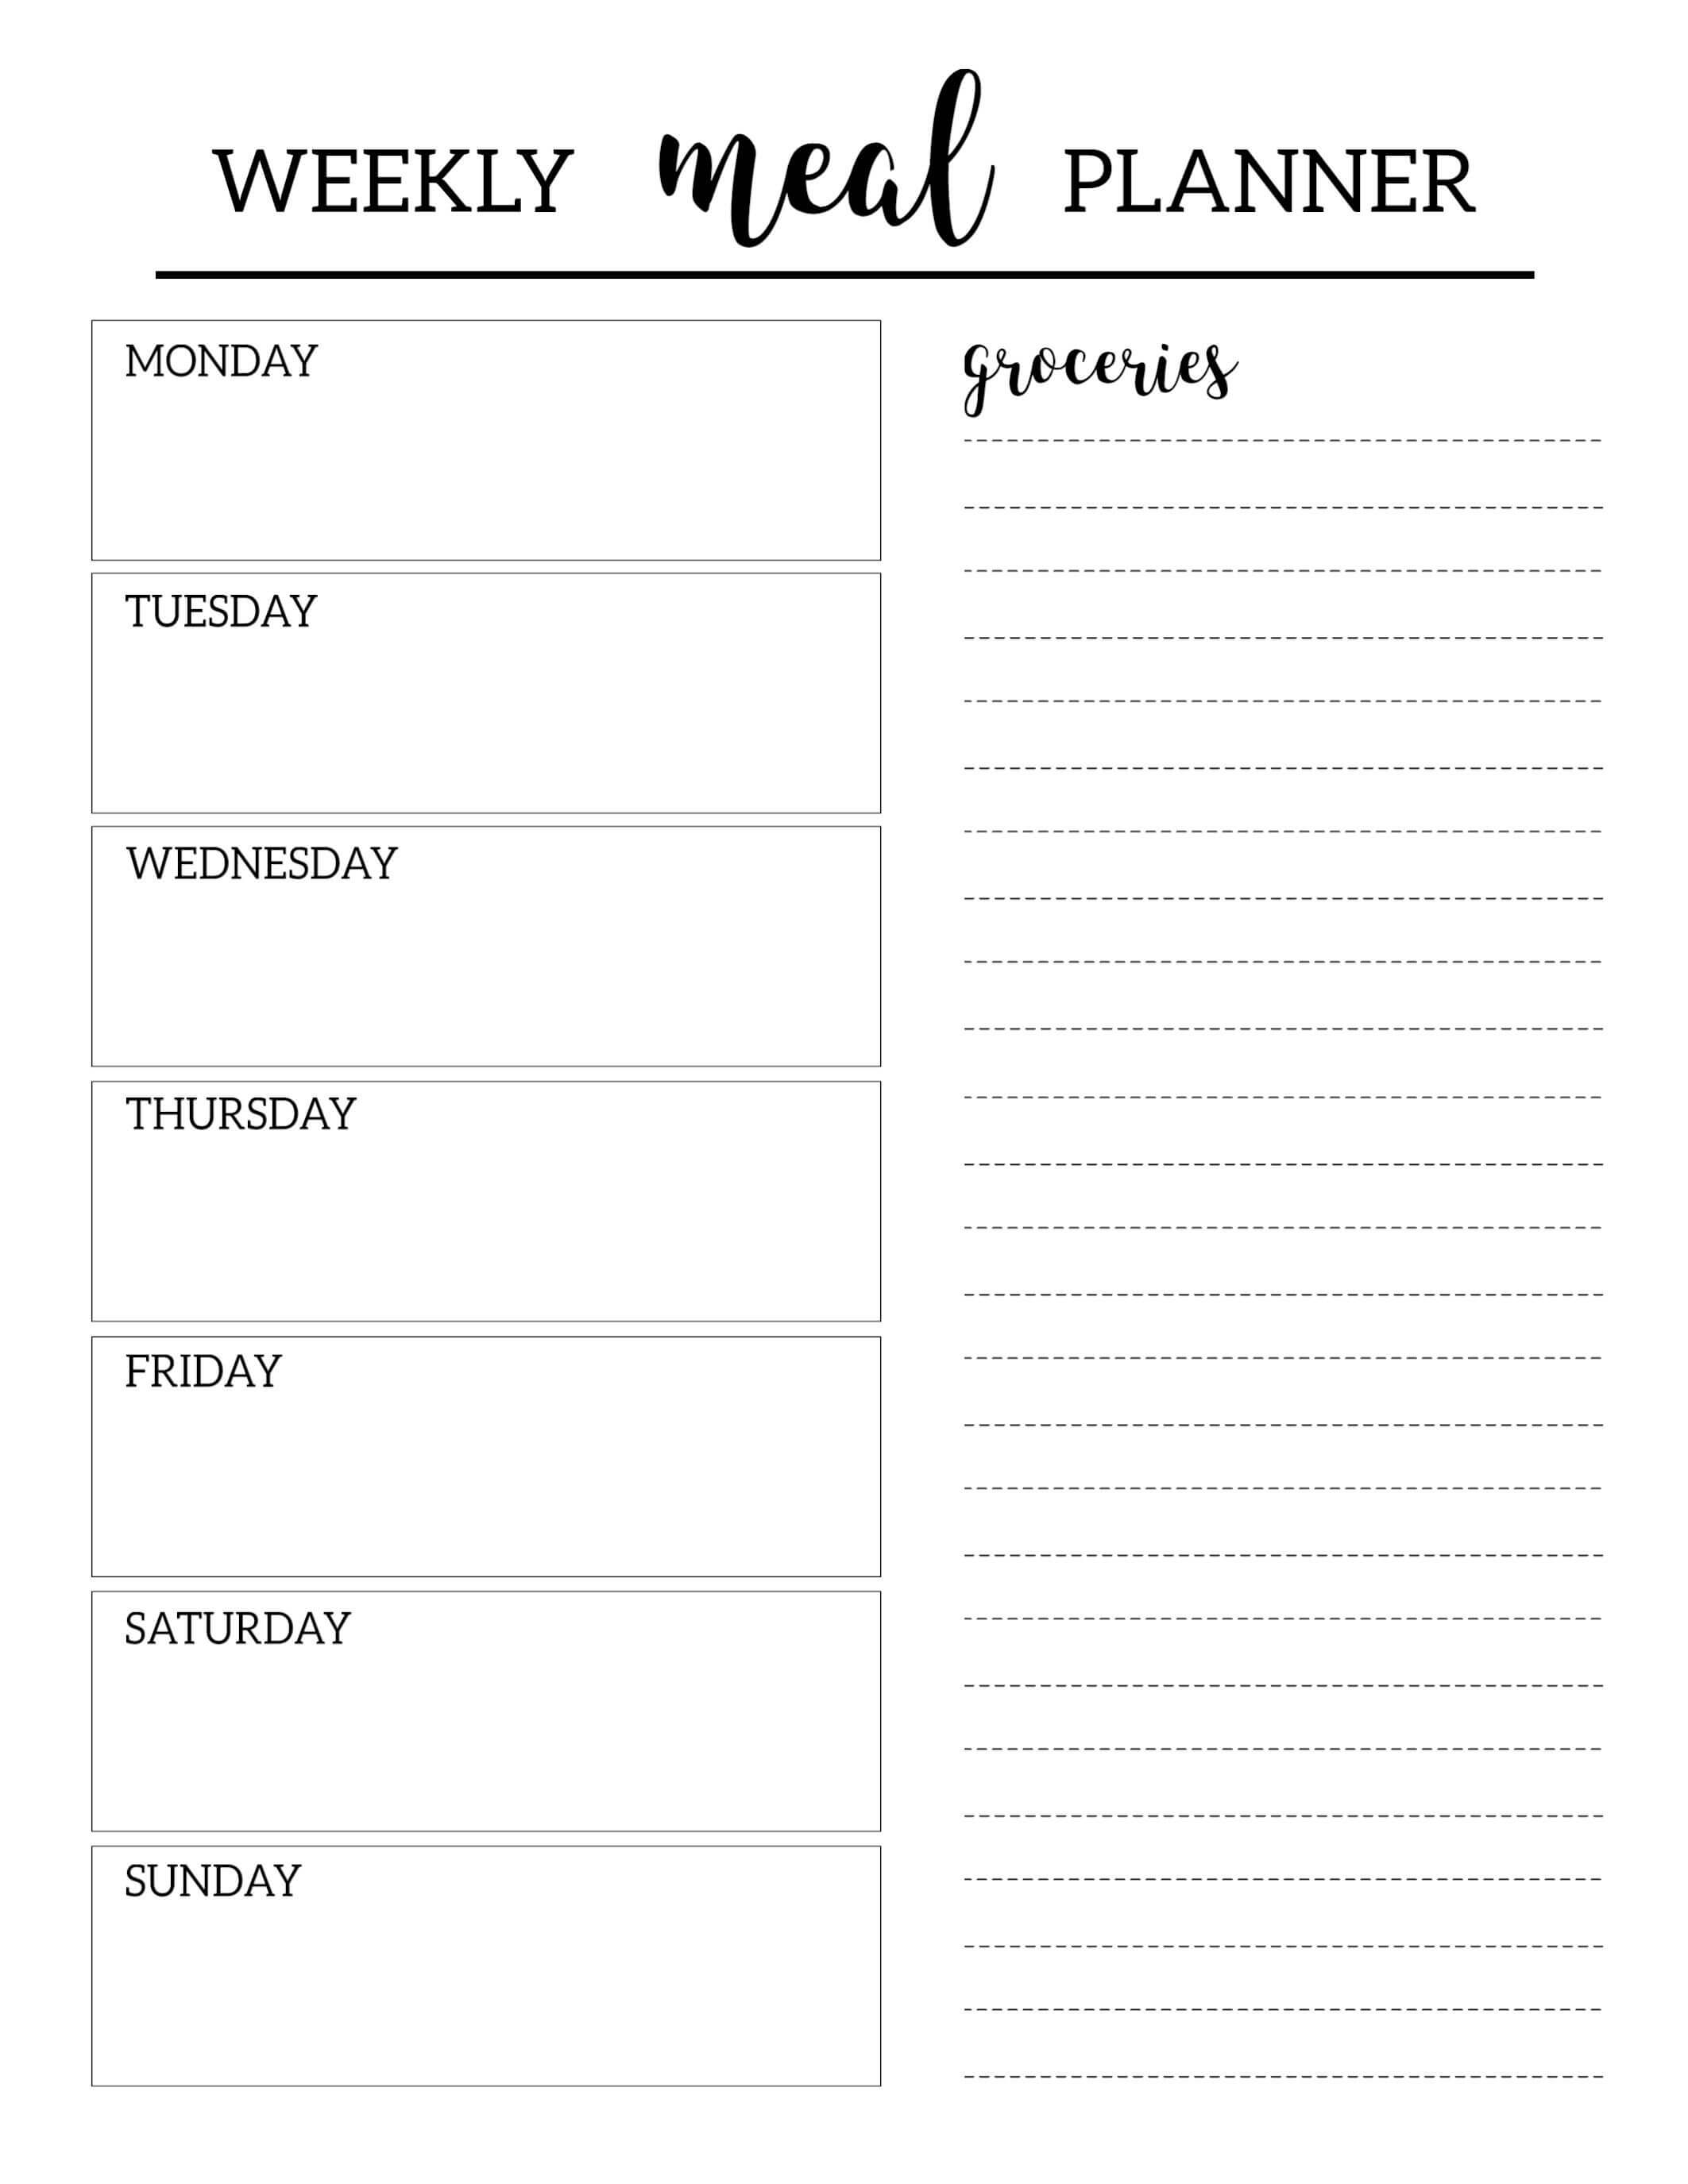 006 Meal Planning Templates Plan Frightening Planner Word Pertaining To Menu Planning Template Word